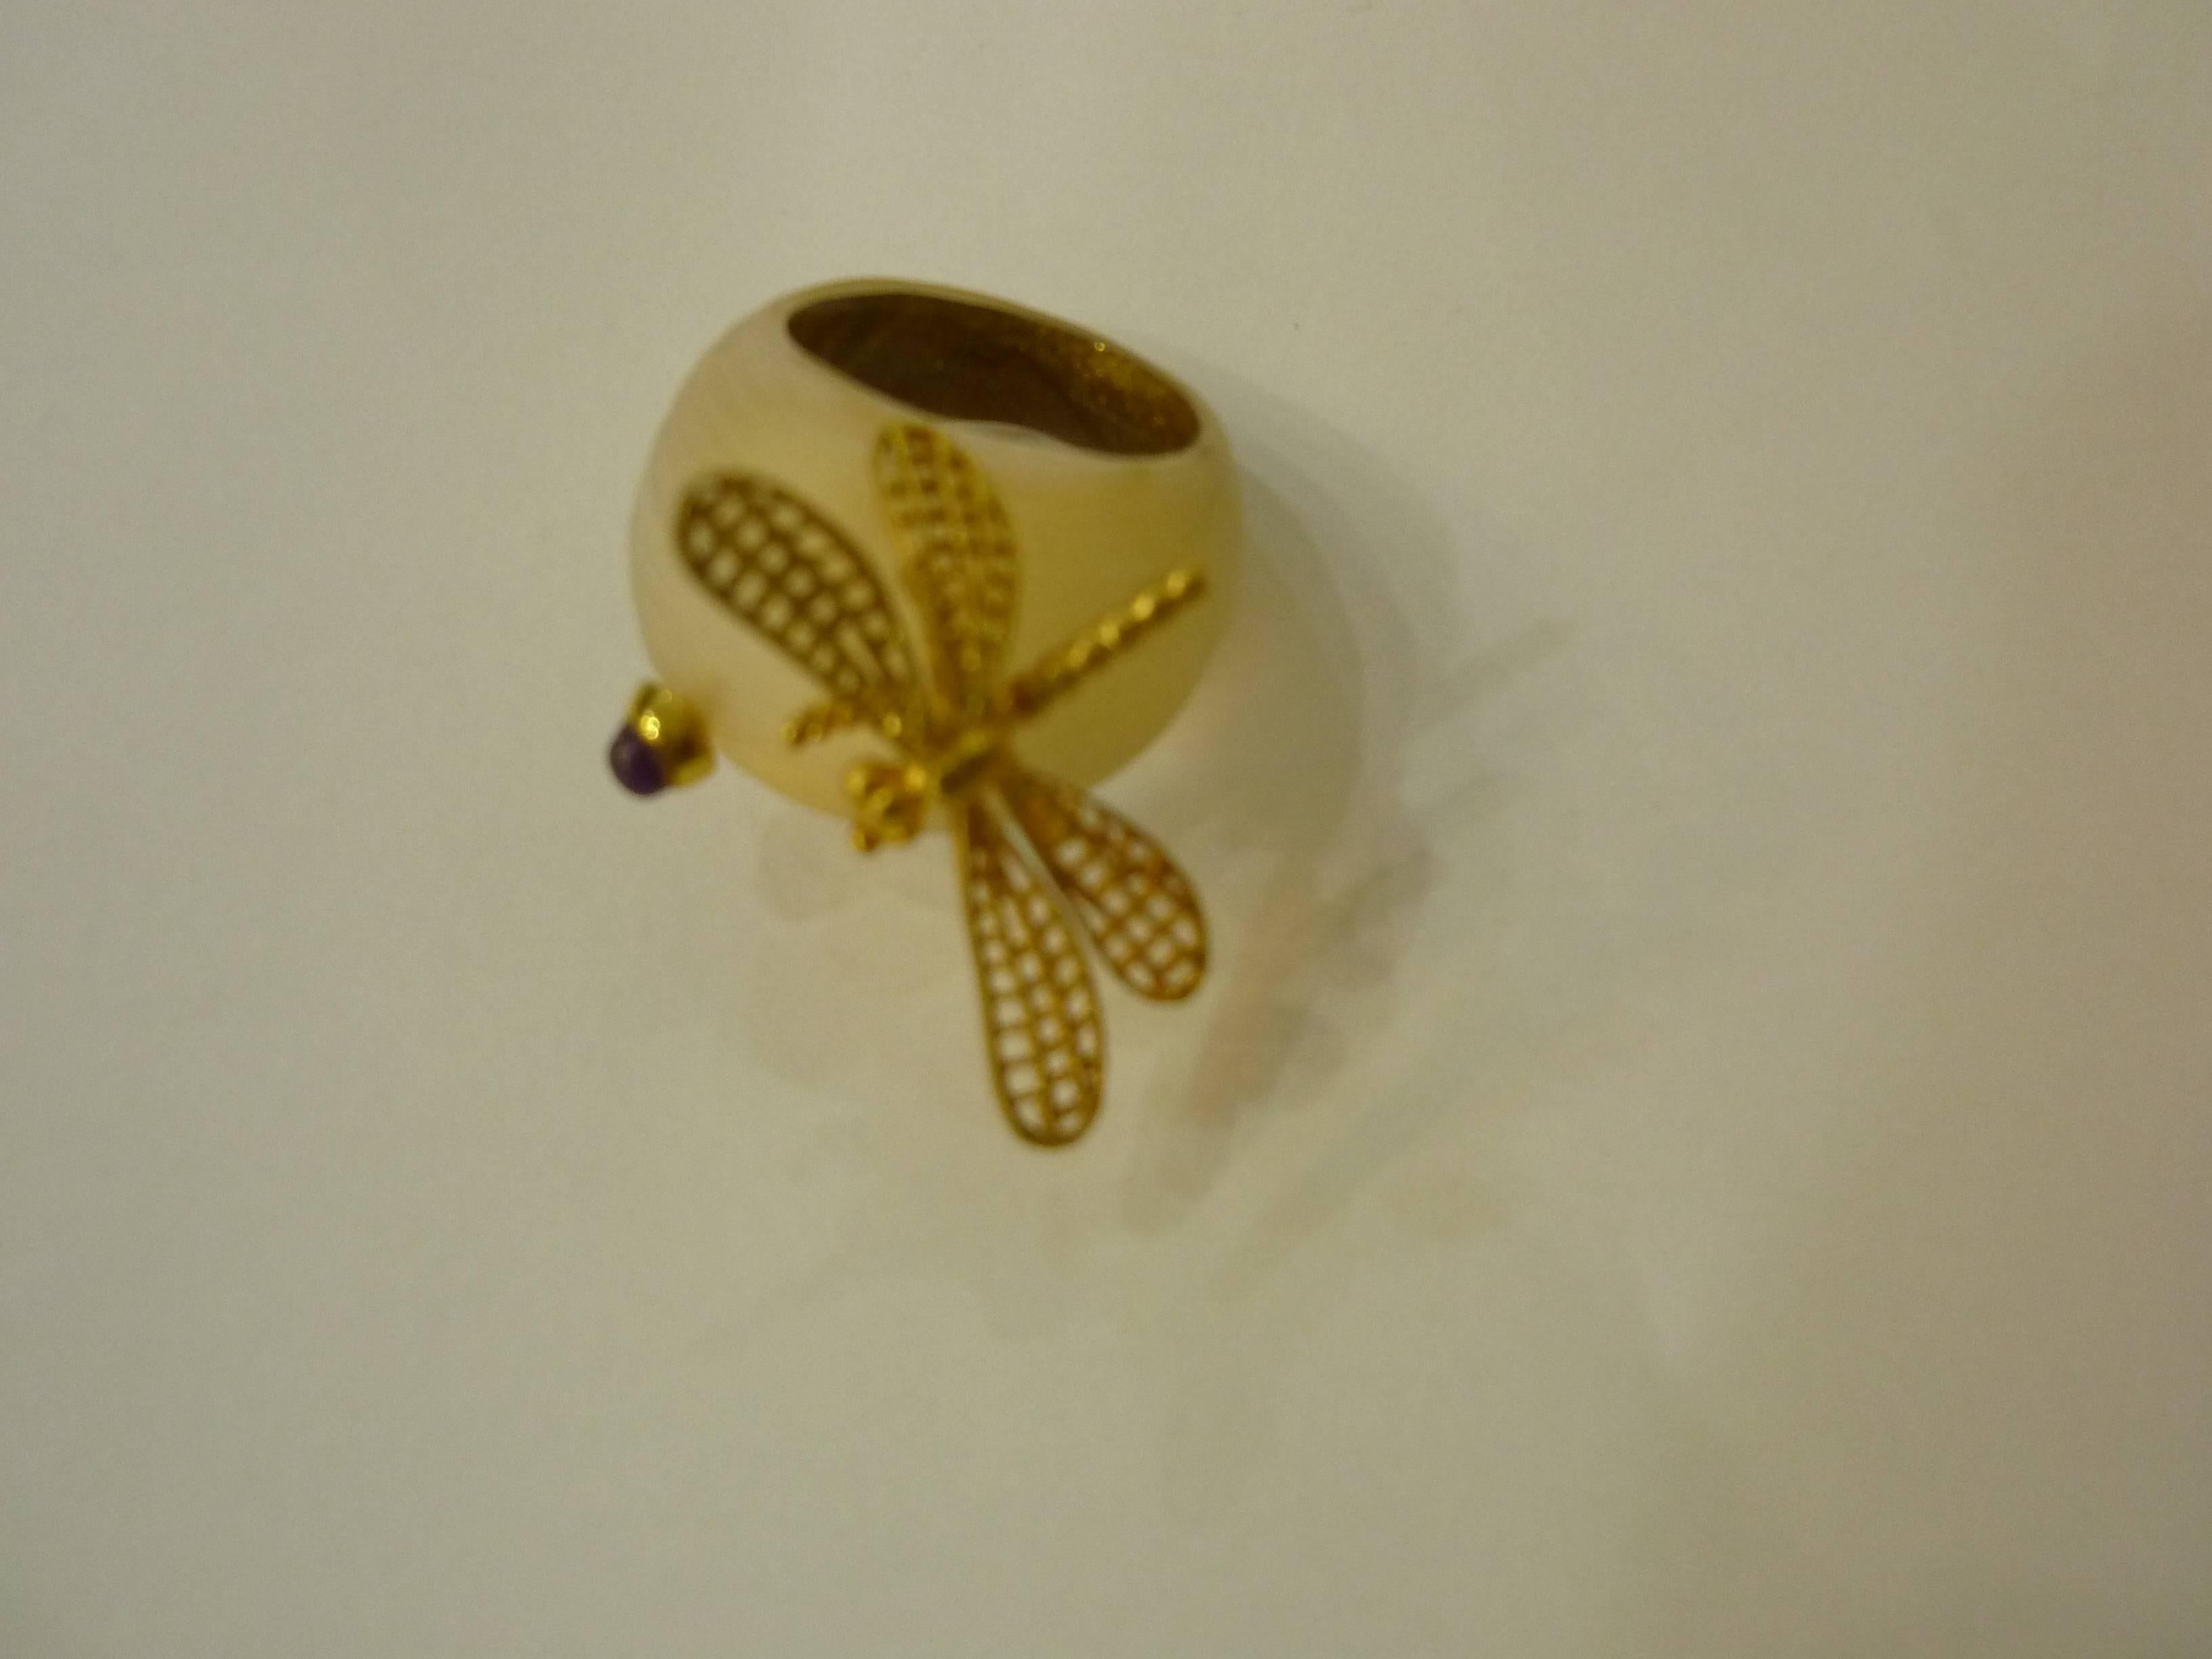 Lovely lucite dragonfly ring with a small cabochon. It is a transparent reflective gold color with gold-tone butterfly and cabochon. The interior has a gold gilt look.